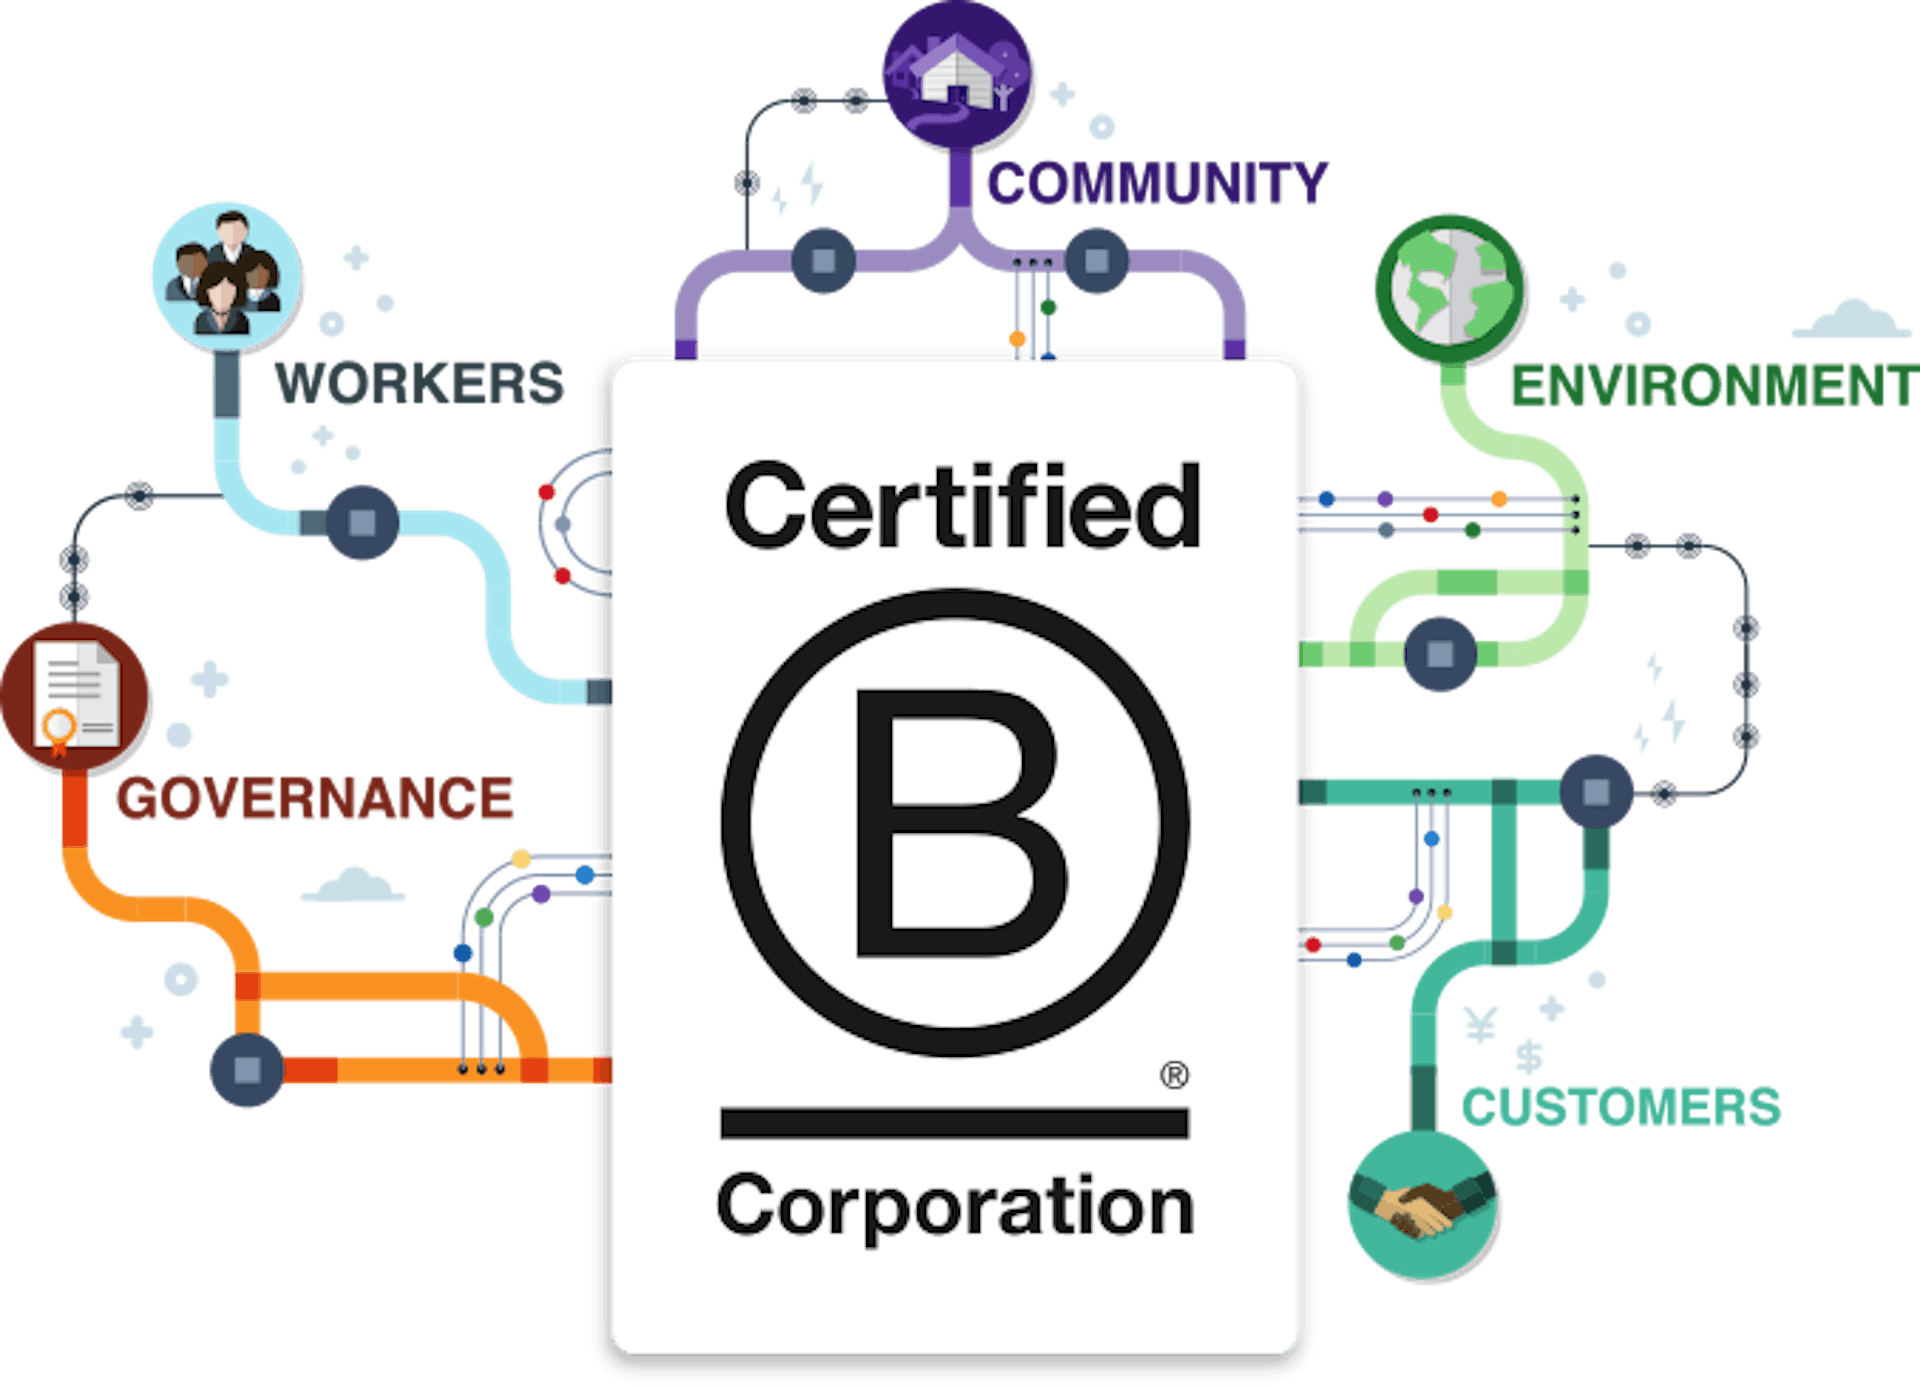 Illustration of the 5 facets of a business that get assessed under a B Corp certification: environment, customers, governance, workers, and community.